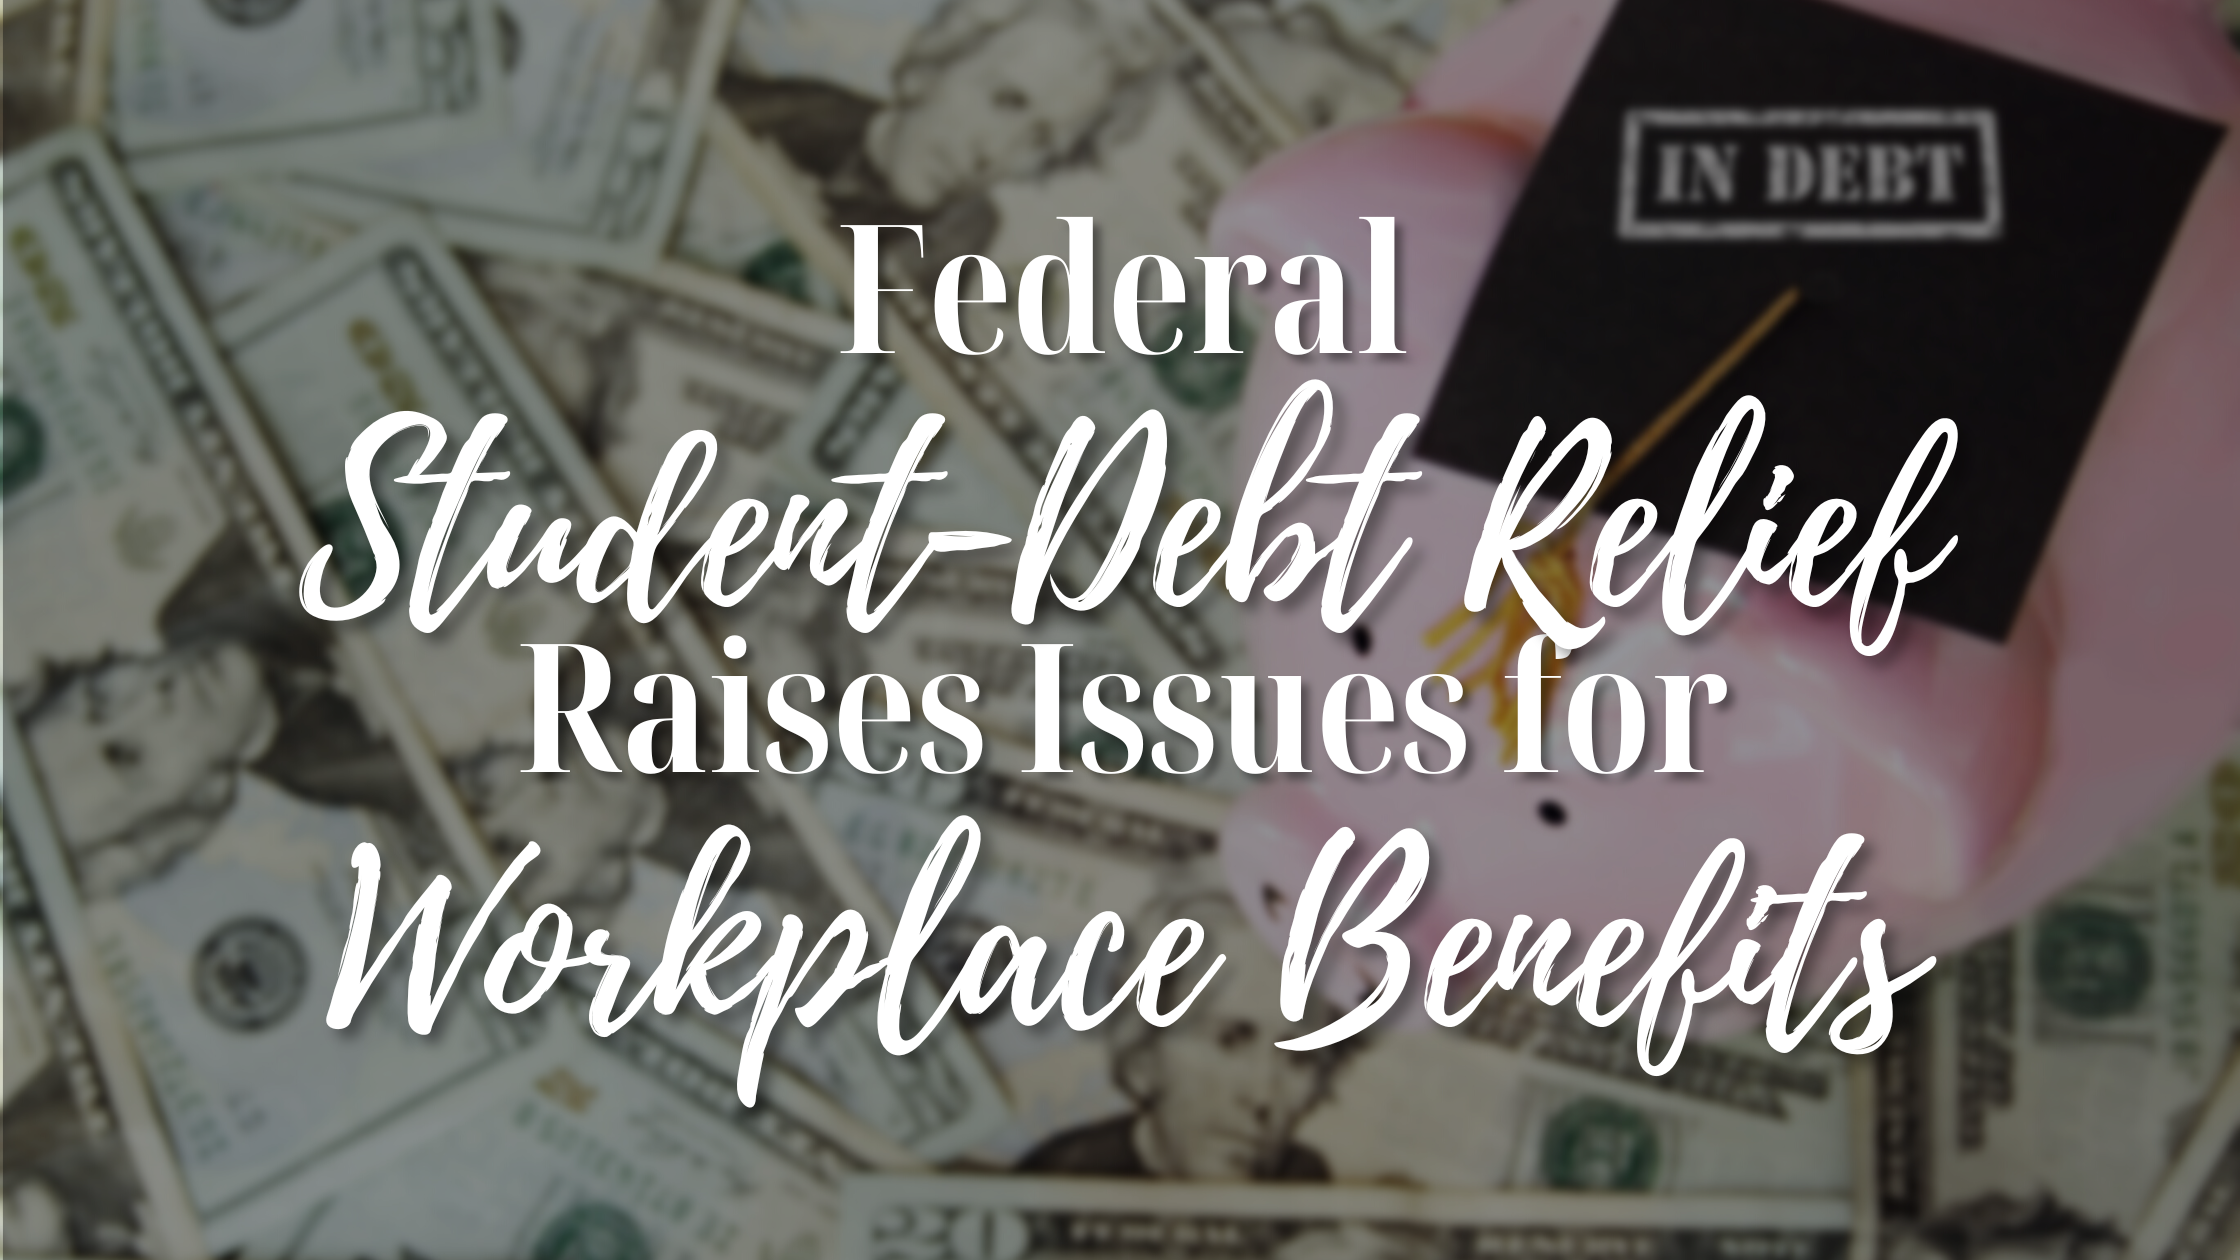 Federal Student-Debt Relief Raises Issues for Workplace Benefits